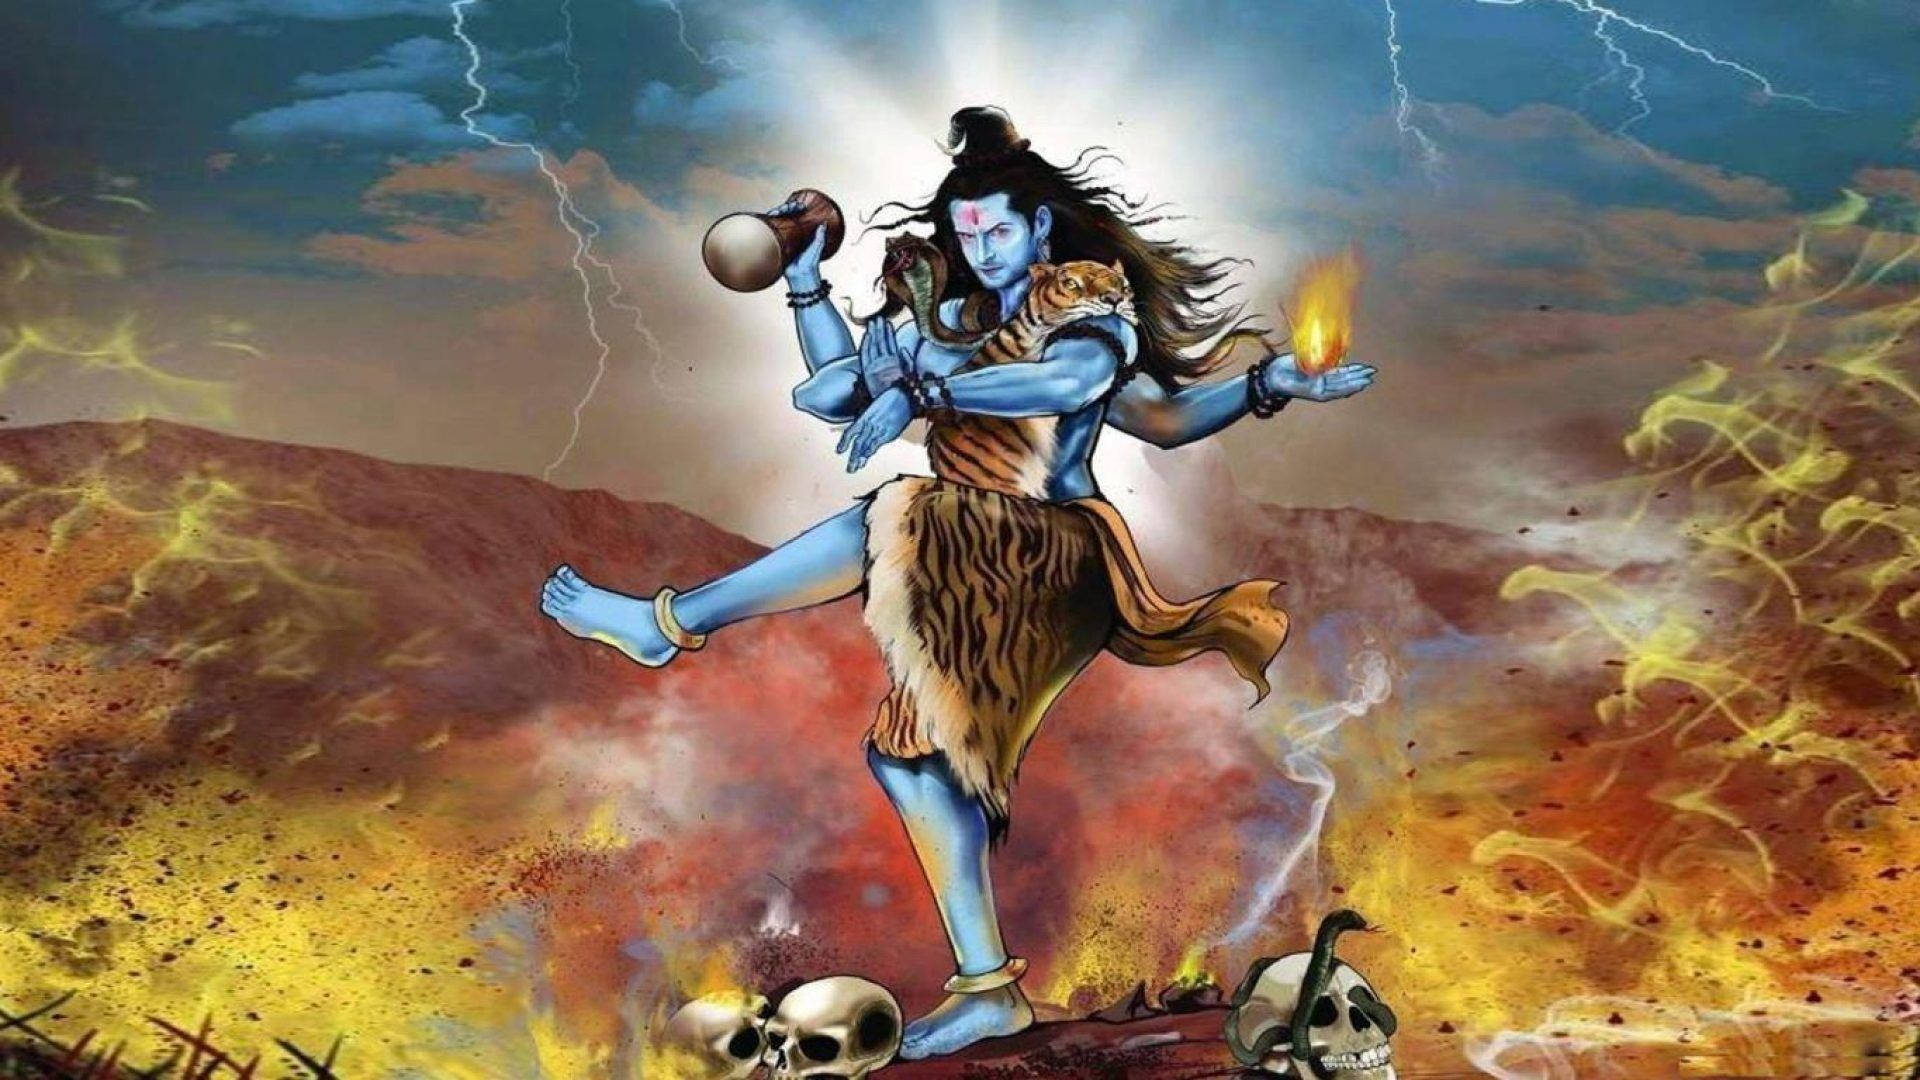 Download Angry Shiva Mountain With Thunderstorms Wallpaper 